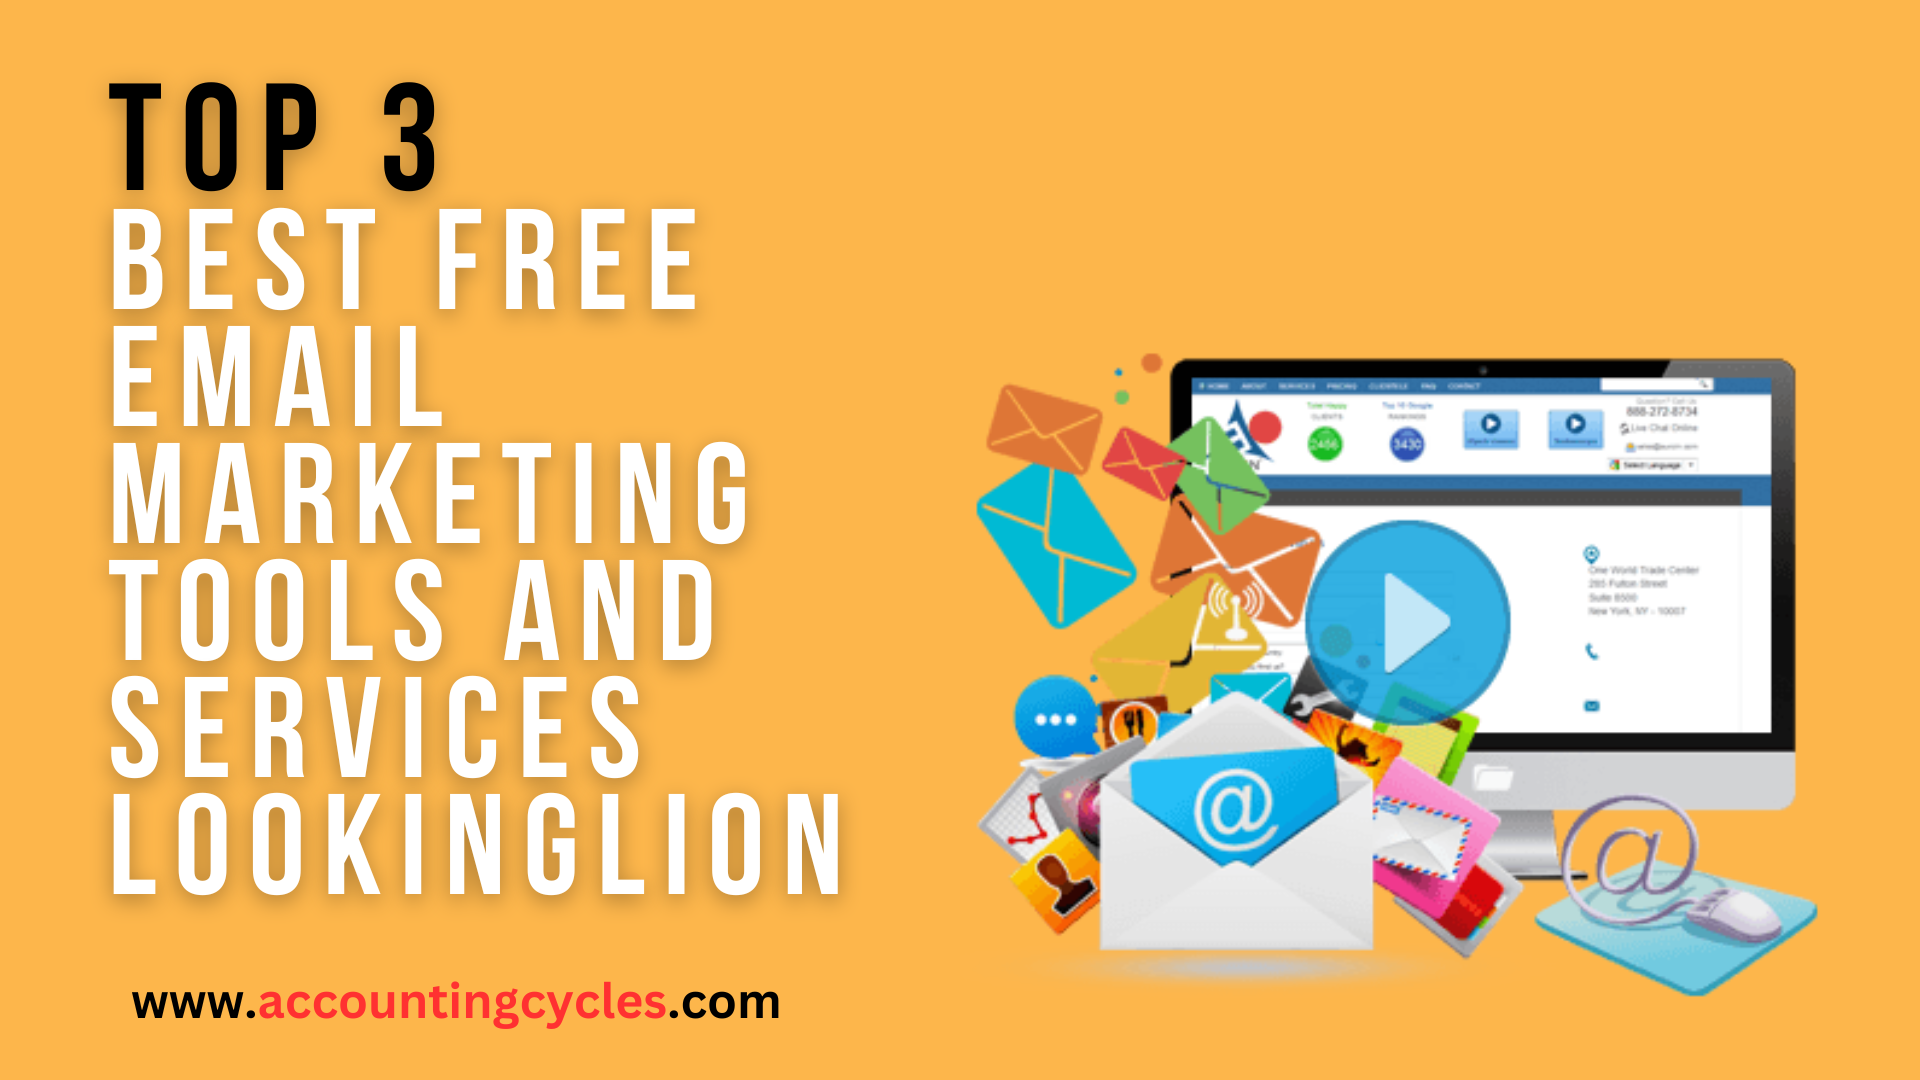 Top 3 Best Free Email Marketing Tools and Services Lookinglion: